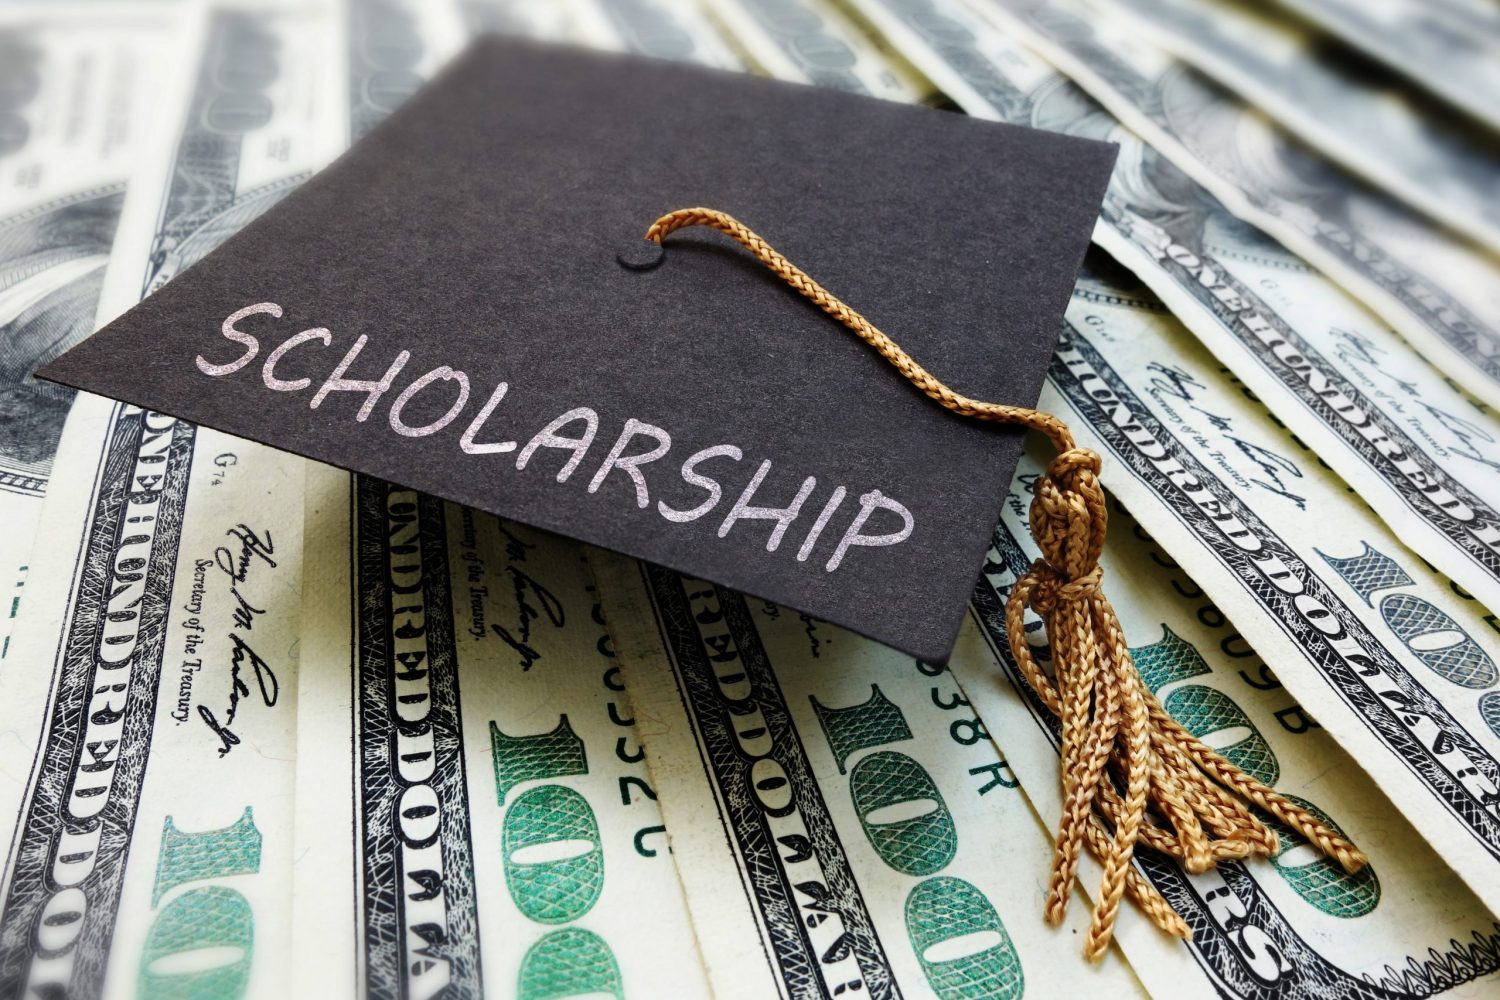 international-scholarships-for-masters-and-phd-candidates-2017-2018-offered-scholarships